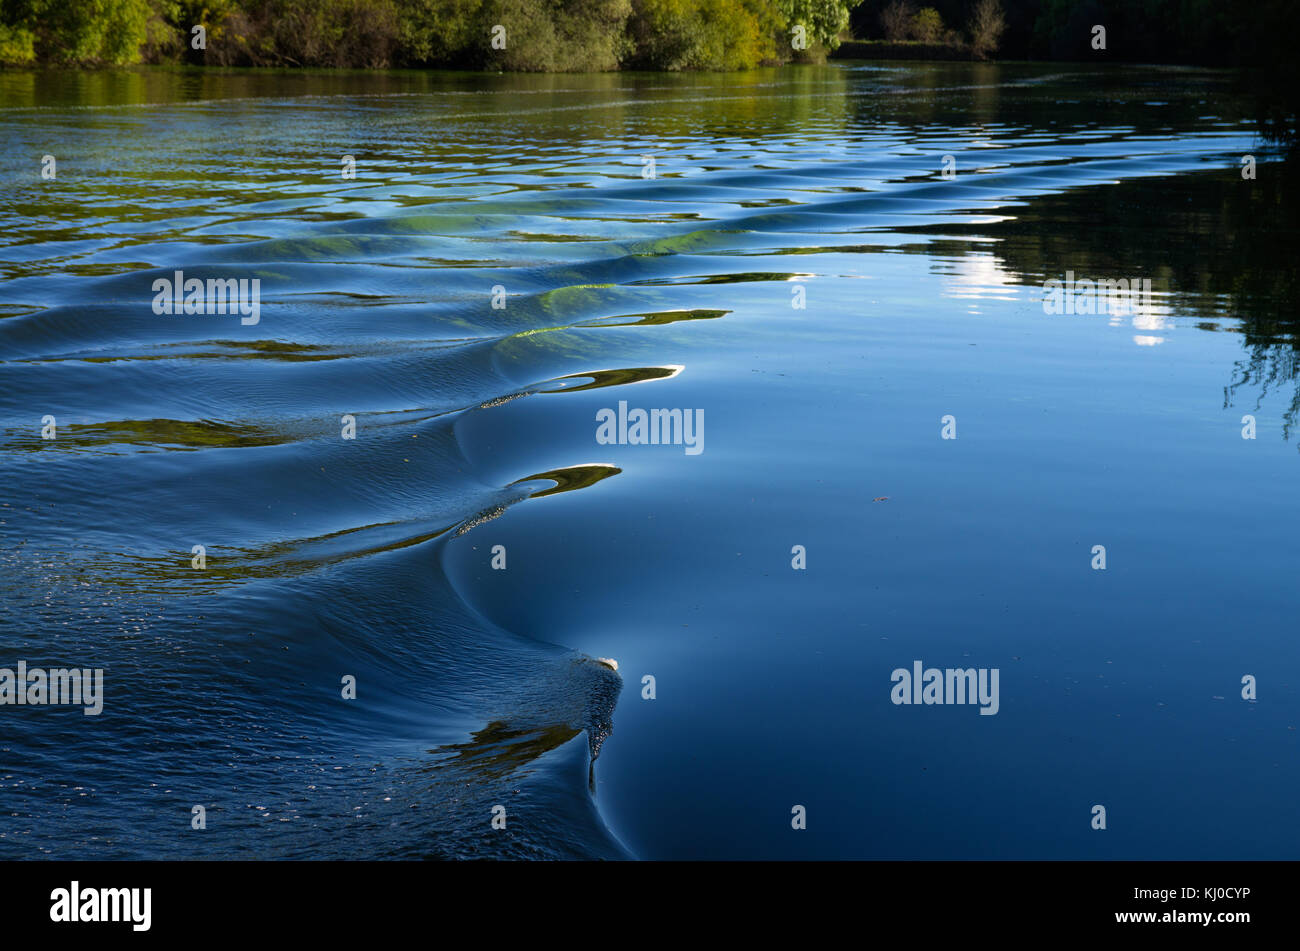 Boat wake curving in a river of calm water reflecting riverbanks and blue sky. Stock Photo